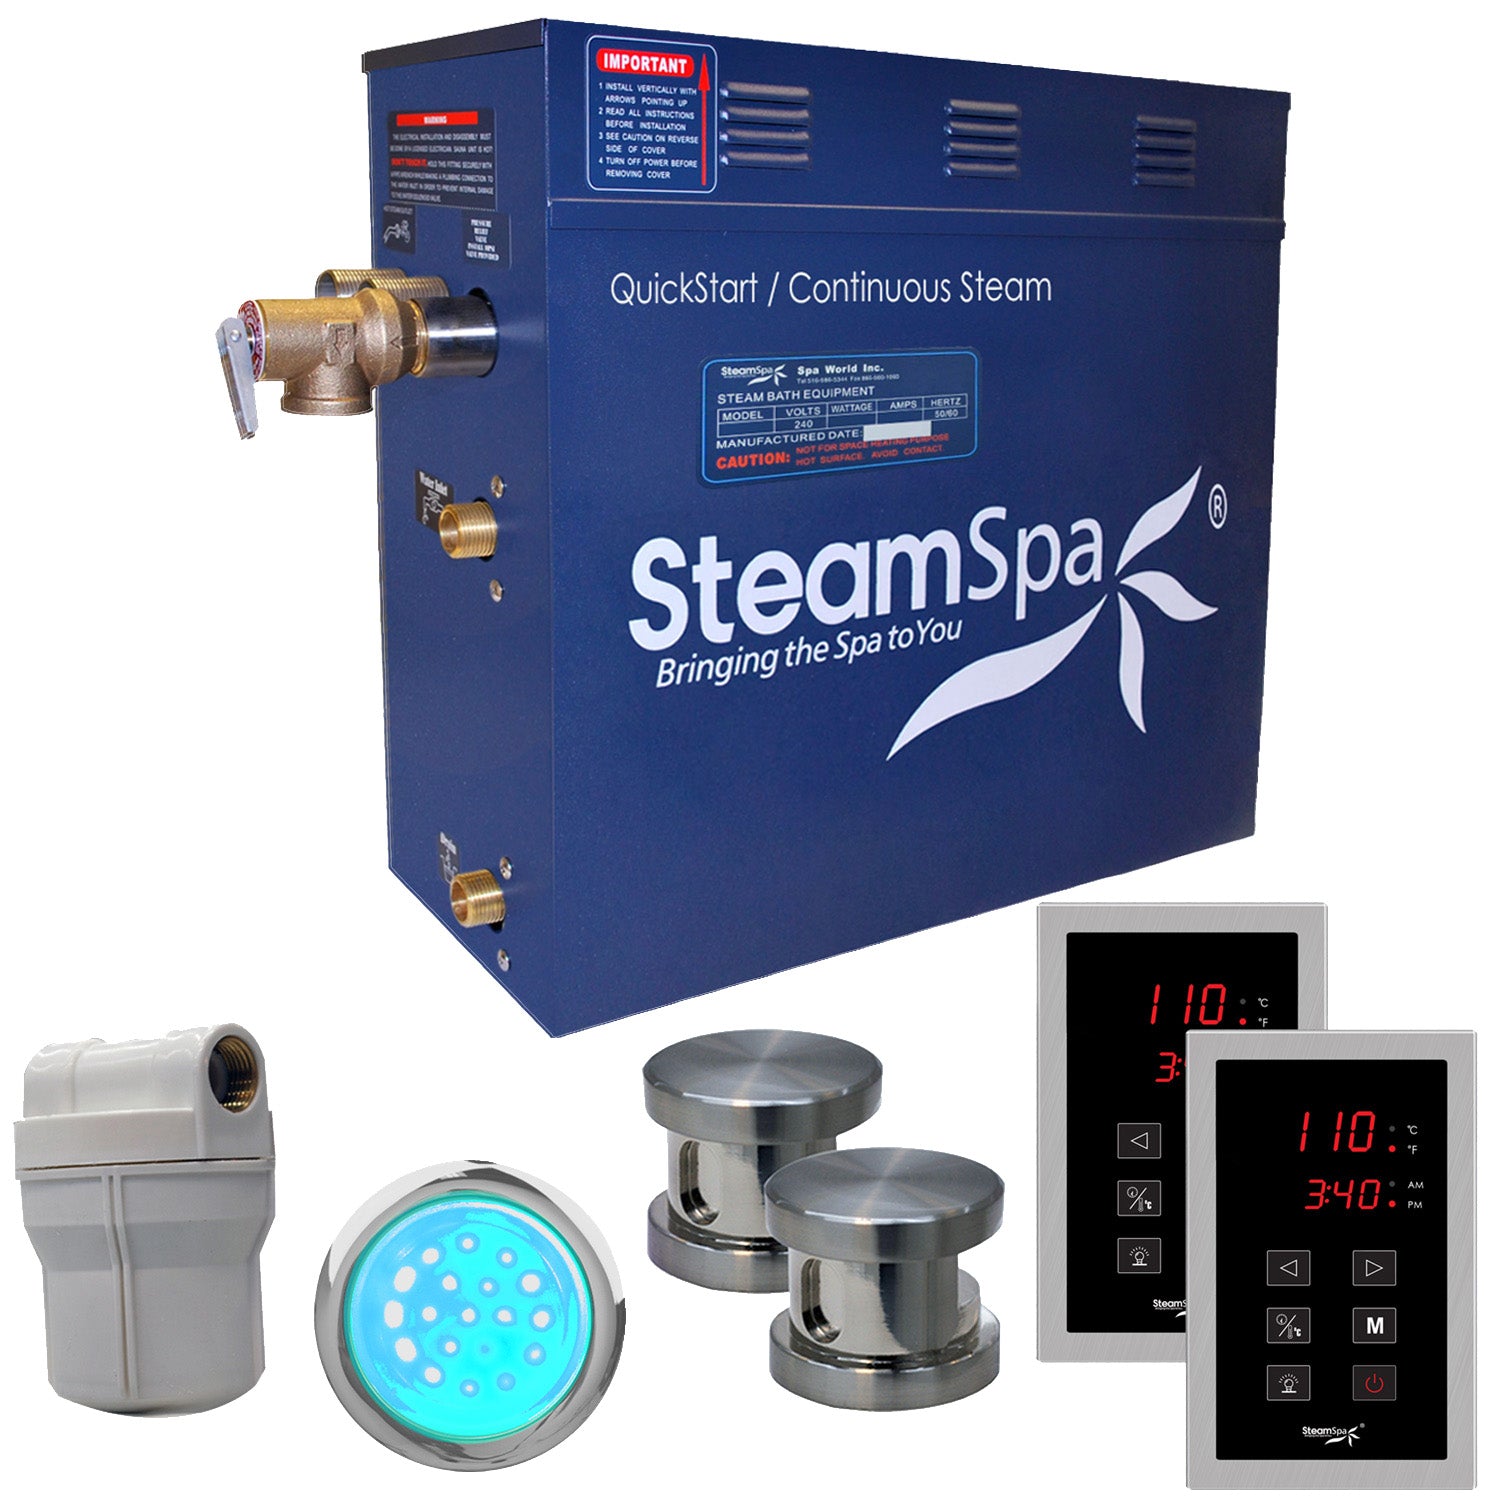 SteamSpa Royal 7.5 KW QuickStart Acu-Steam Bath Generator Package - 16 in. L x 6.5 in. W x 14.5 in. H - Stainless Steel - Polished Brushed Nickel Finish - 7.5kW QuickStart Acu-Steam Bath Generator, Dual Touch Pad Control Panel, Steam head, Chroma Therapy Light, Filter, Pressure Relief Valve - RYT750 - Vital Hydrotherapy